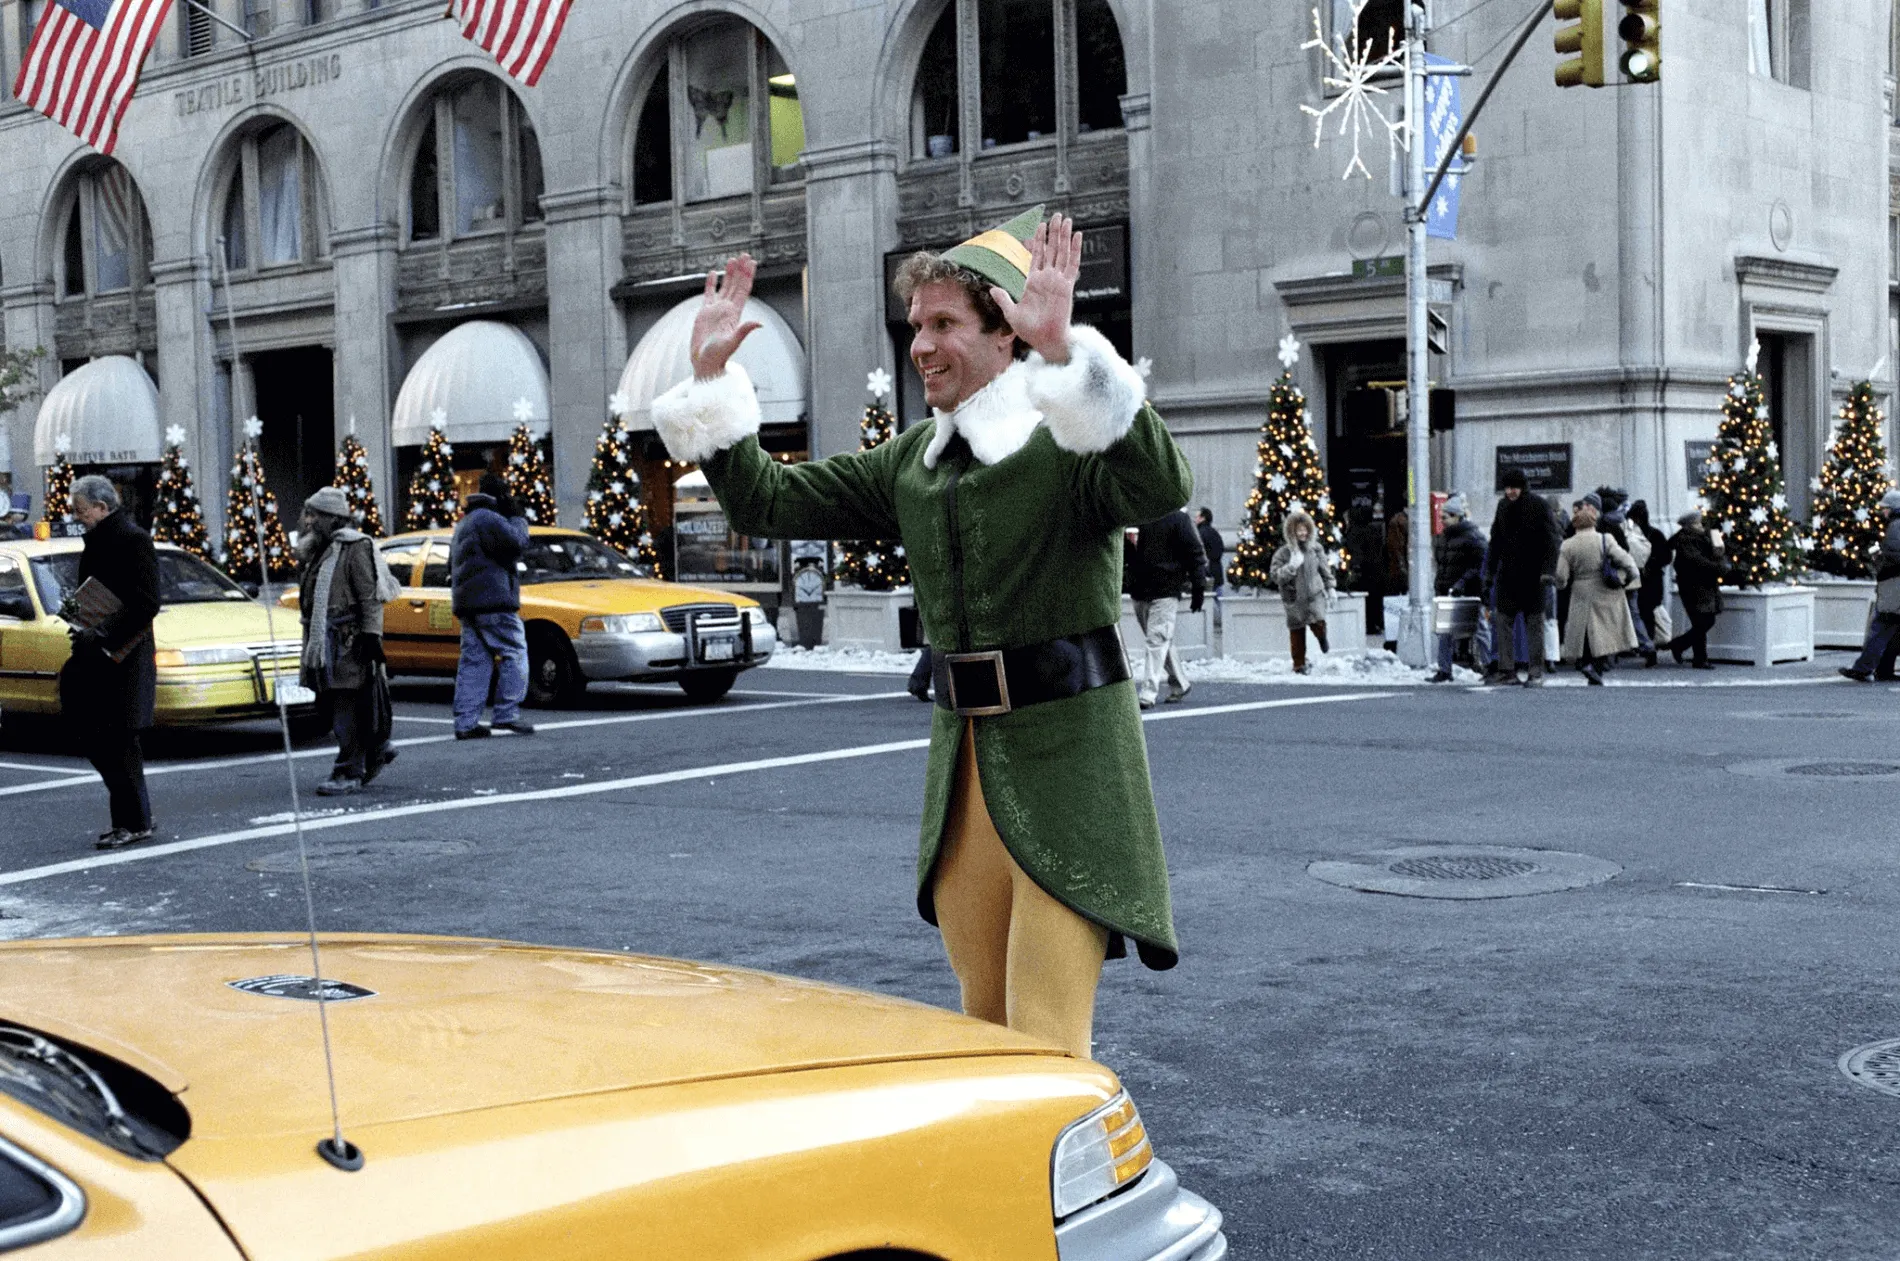 Image of Buddy from the movie Elf, getting stopped by a cab while crossing the street in New York